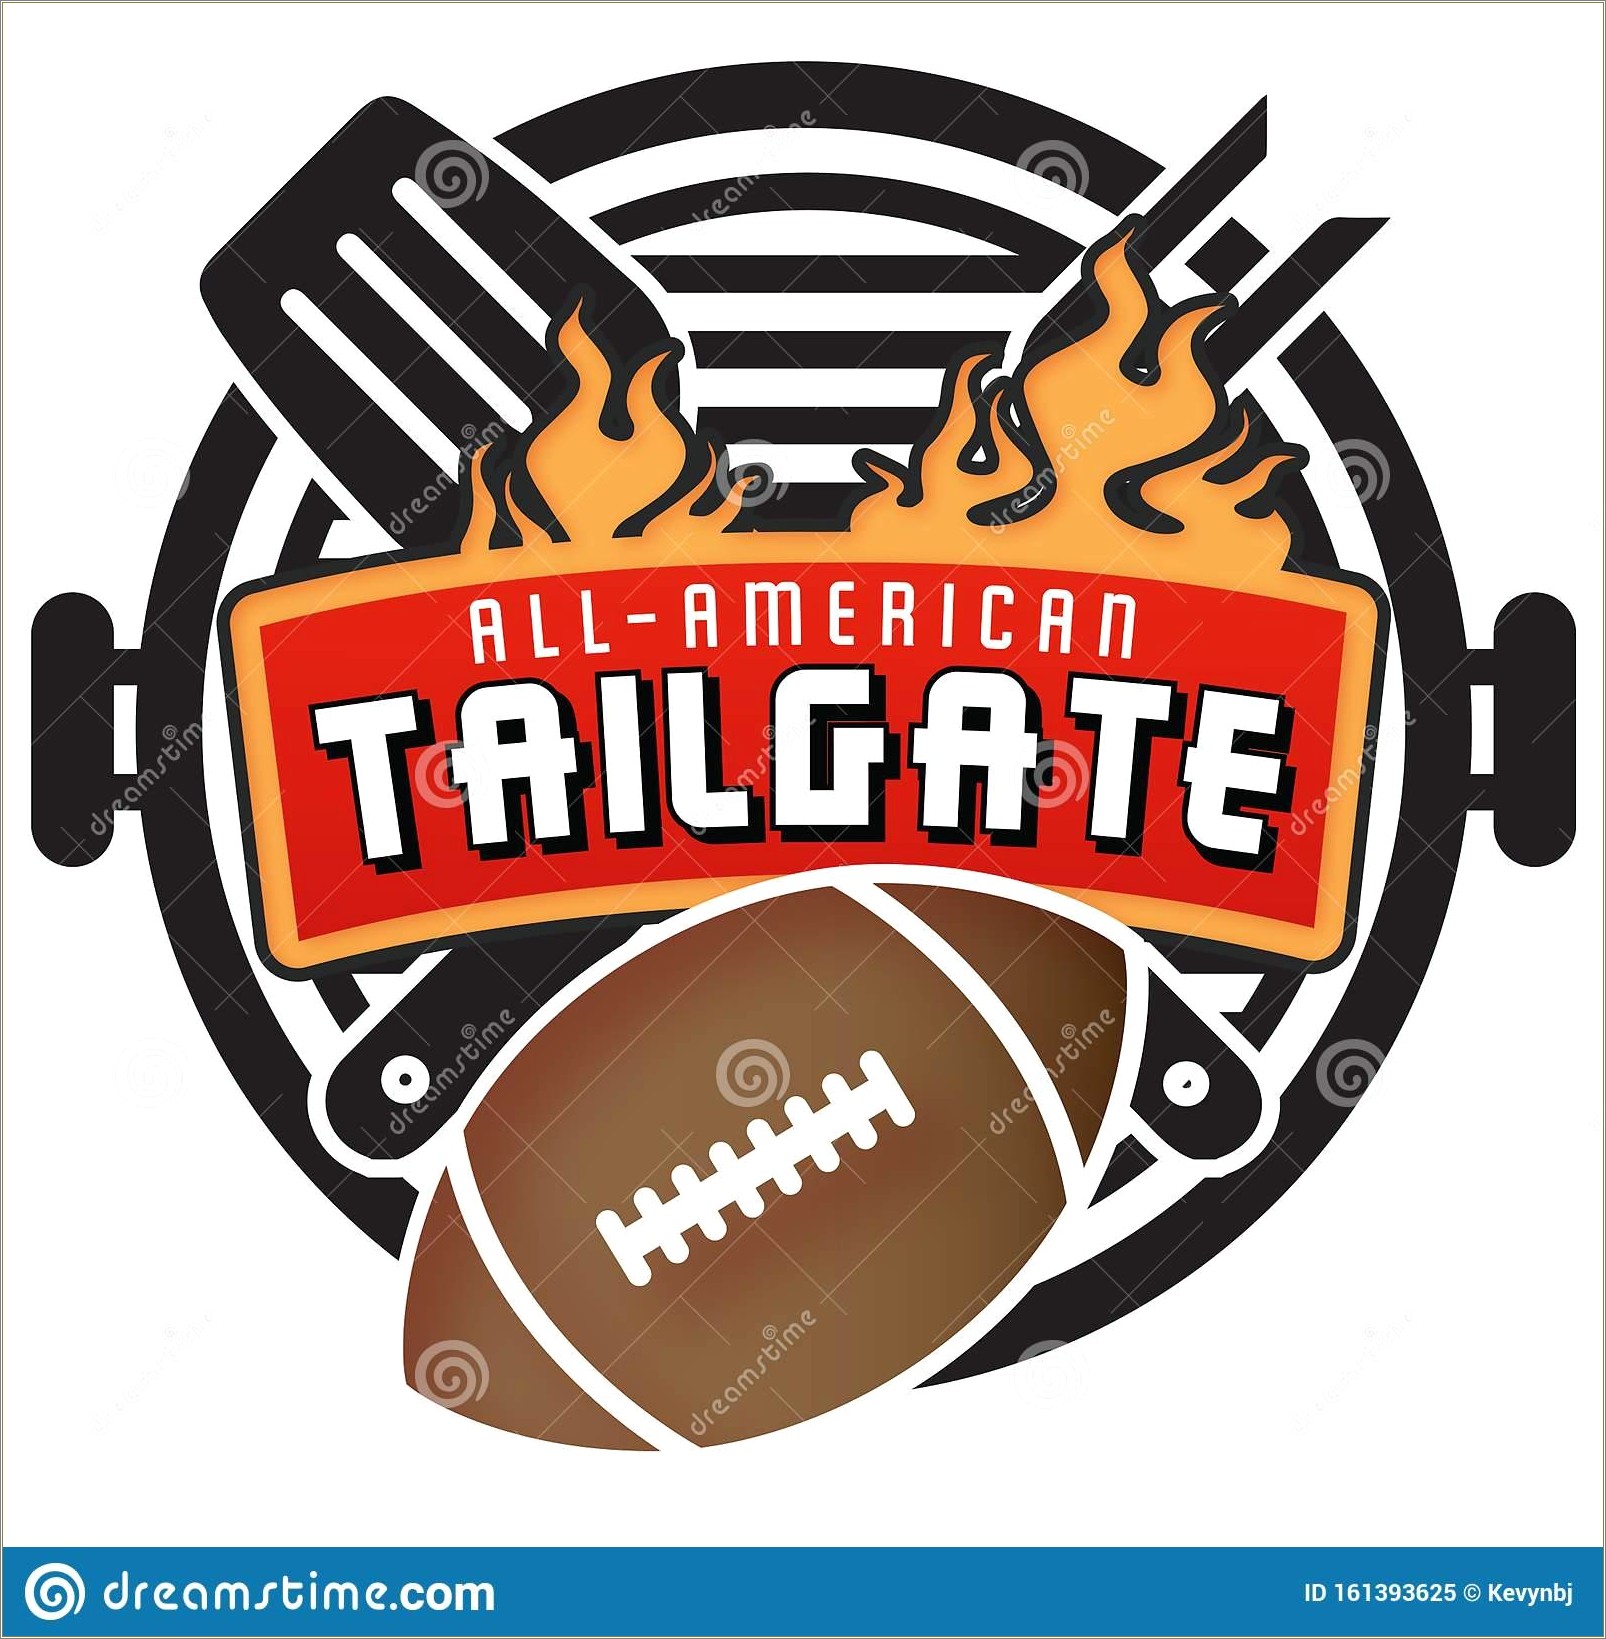 Free Superbowl Tailgate Invitations Templates To Download